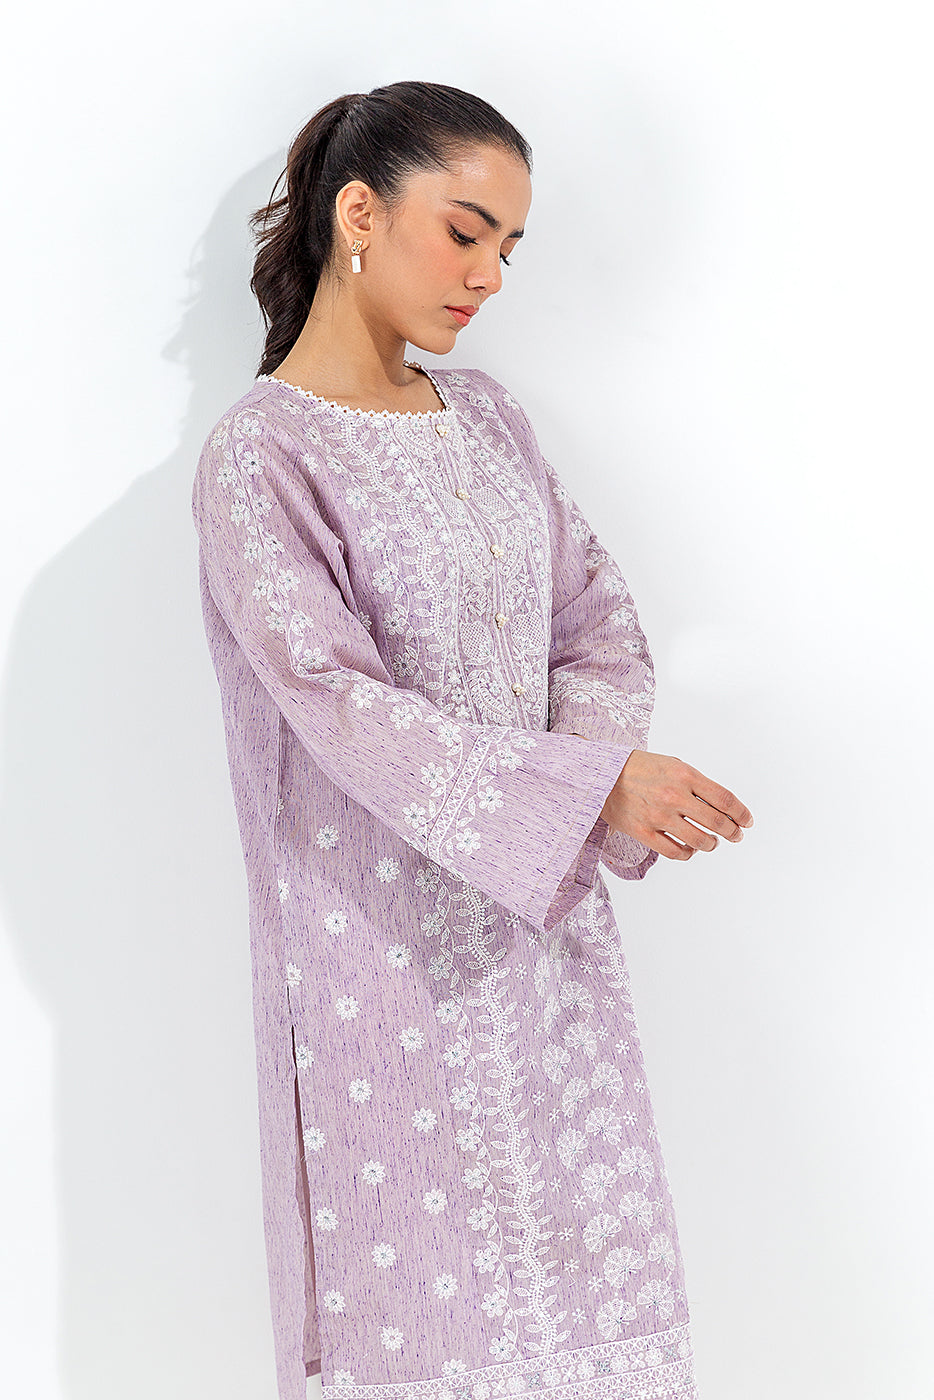 2 PIECE EMBROIDERED FANCY NEPS SUIT (LUXURY PRET)